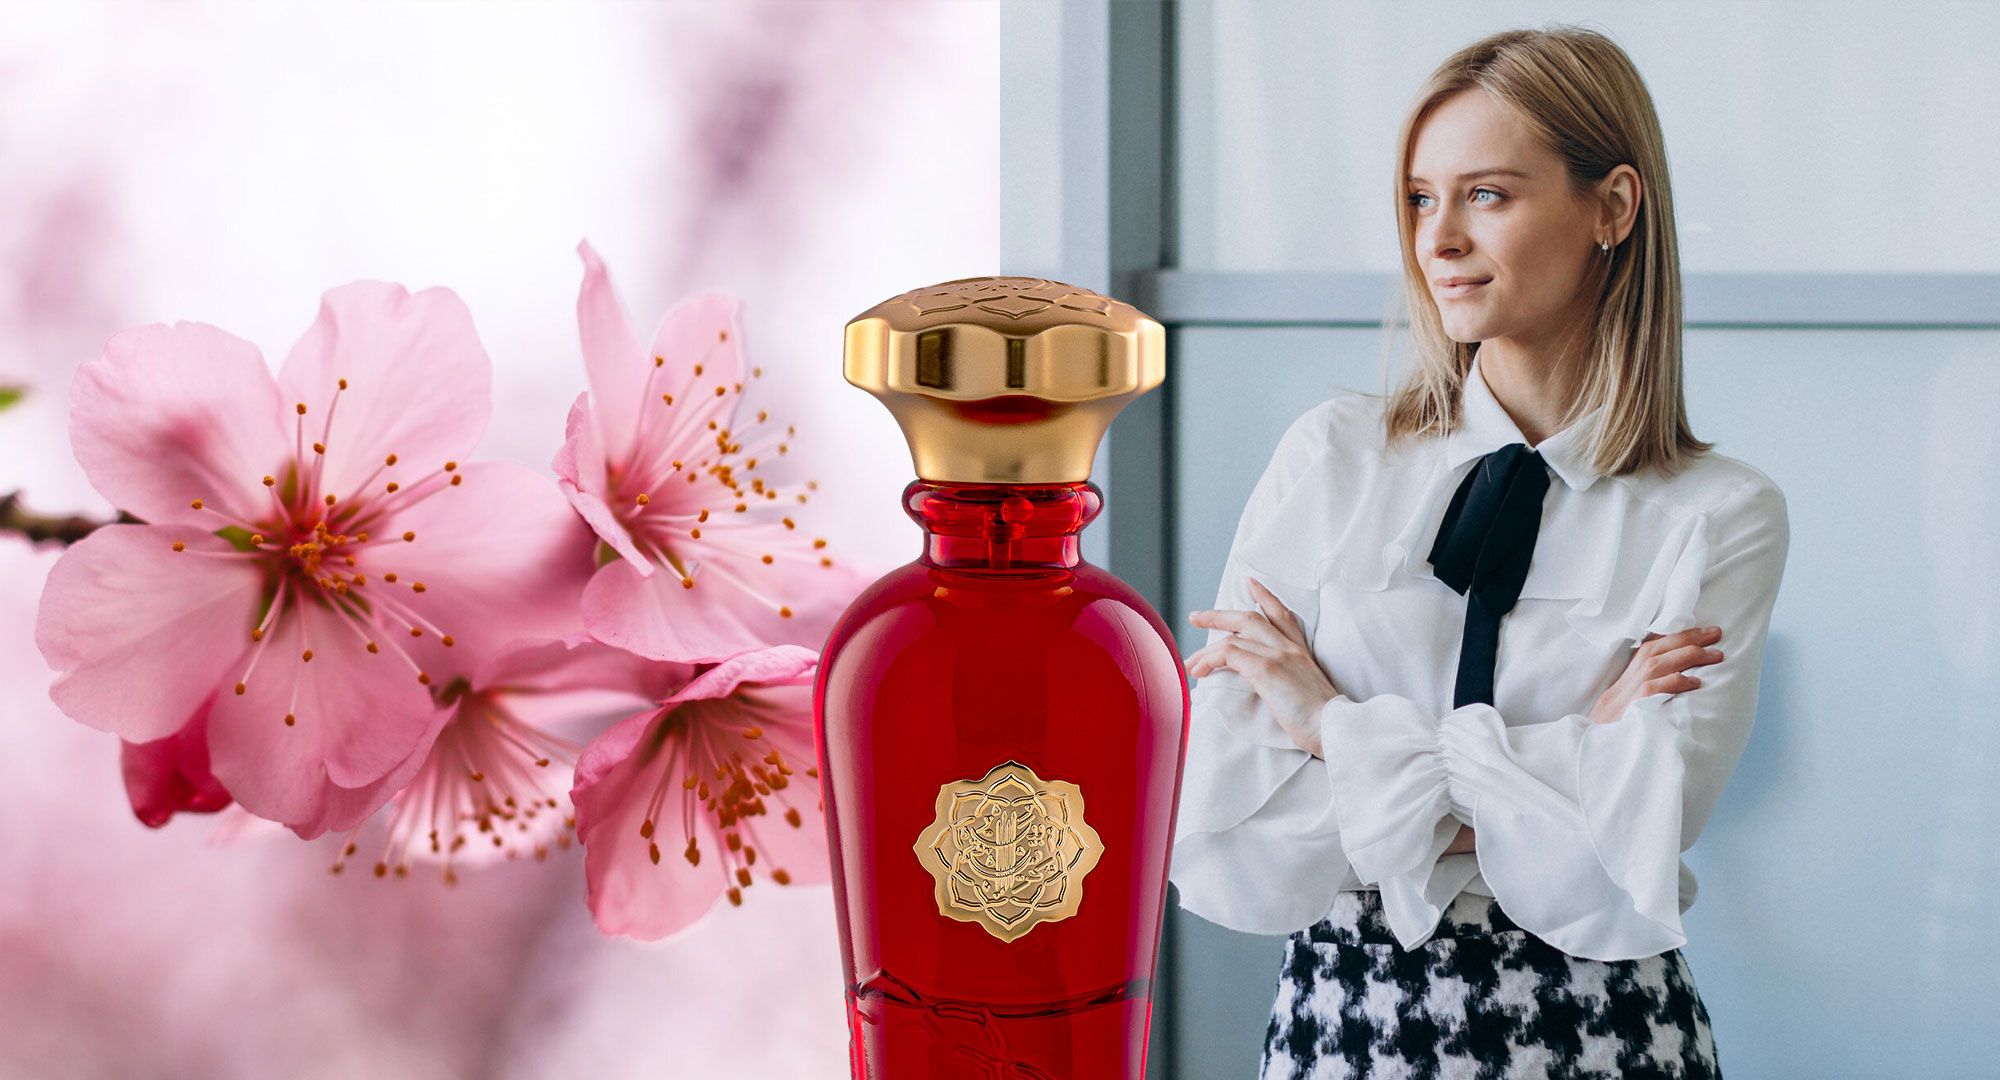 What Are the Best Occasions to Wear Light Floral Perfumes?